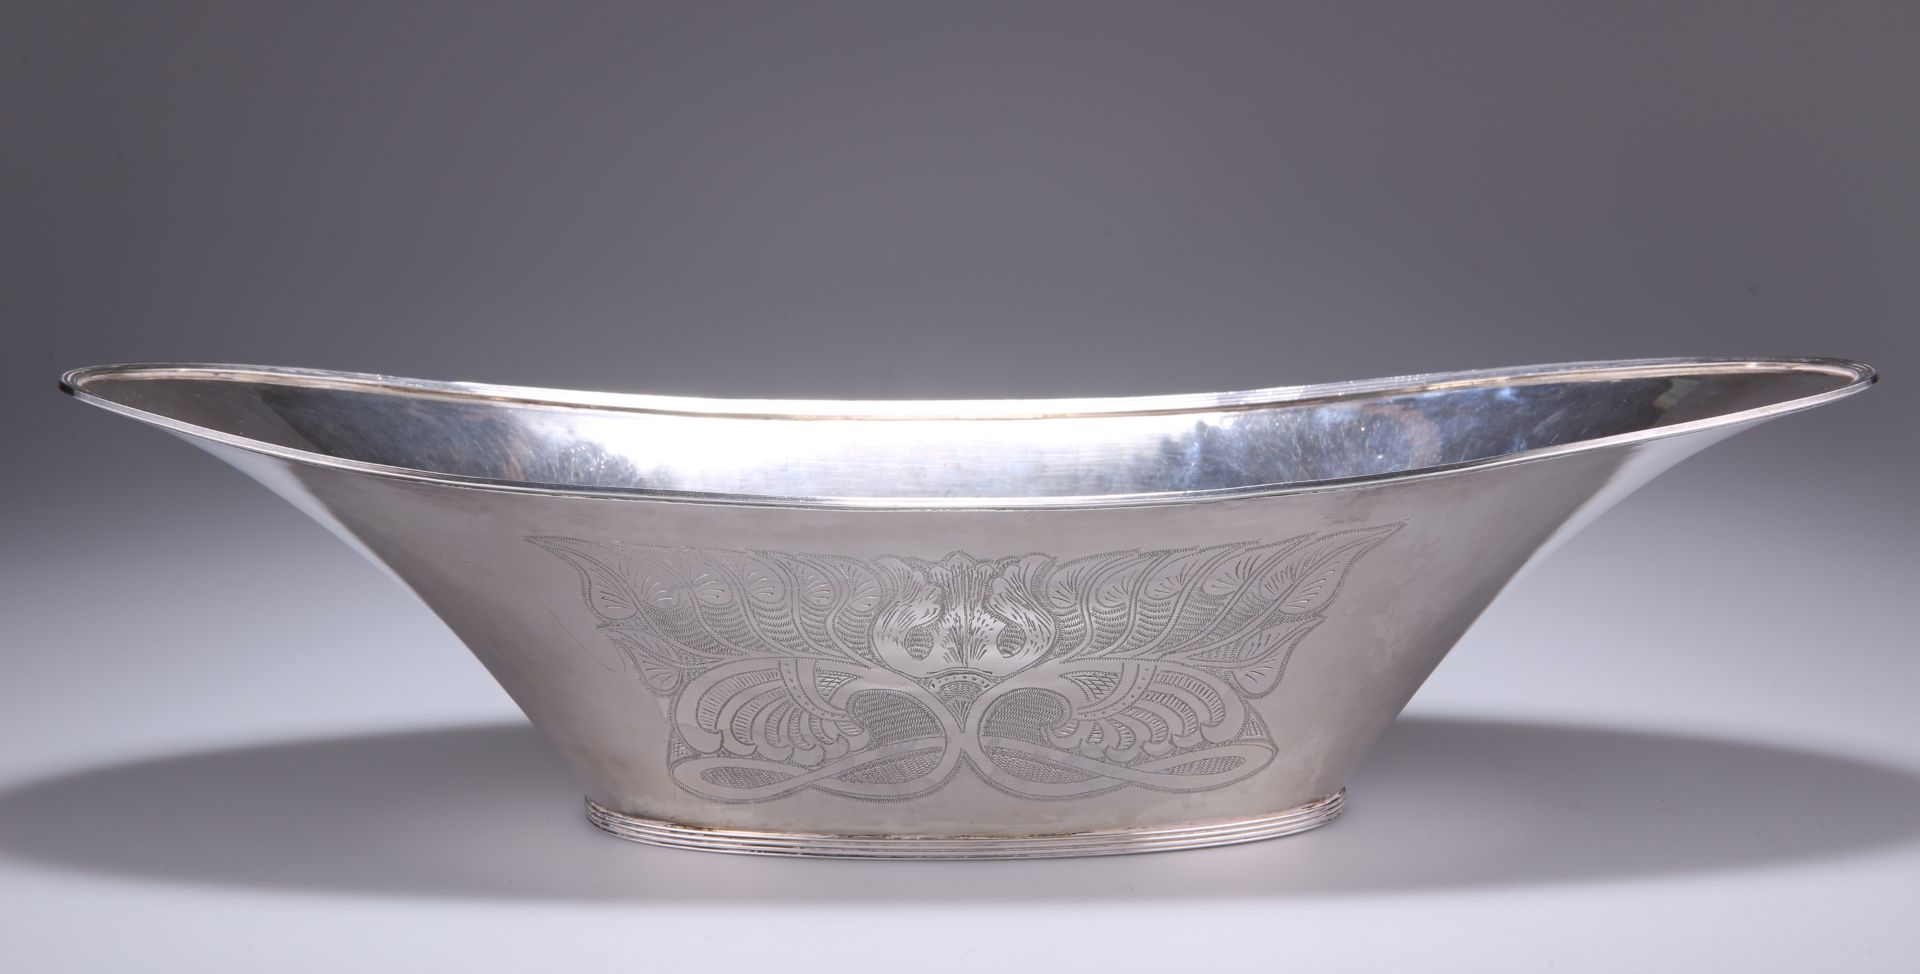 HENRY GEORGE MURPHY (1884-1939), A FALCON WORKS SILVER FRUIT BOWL